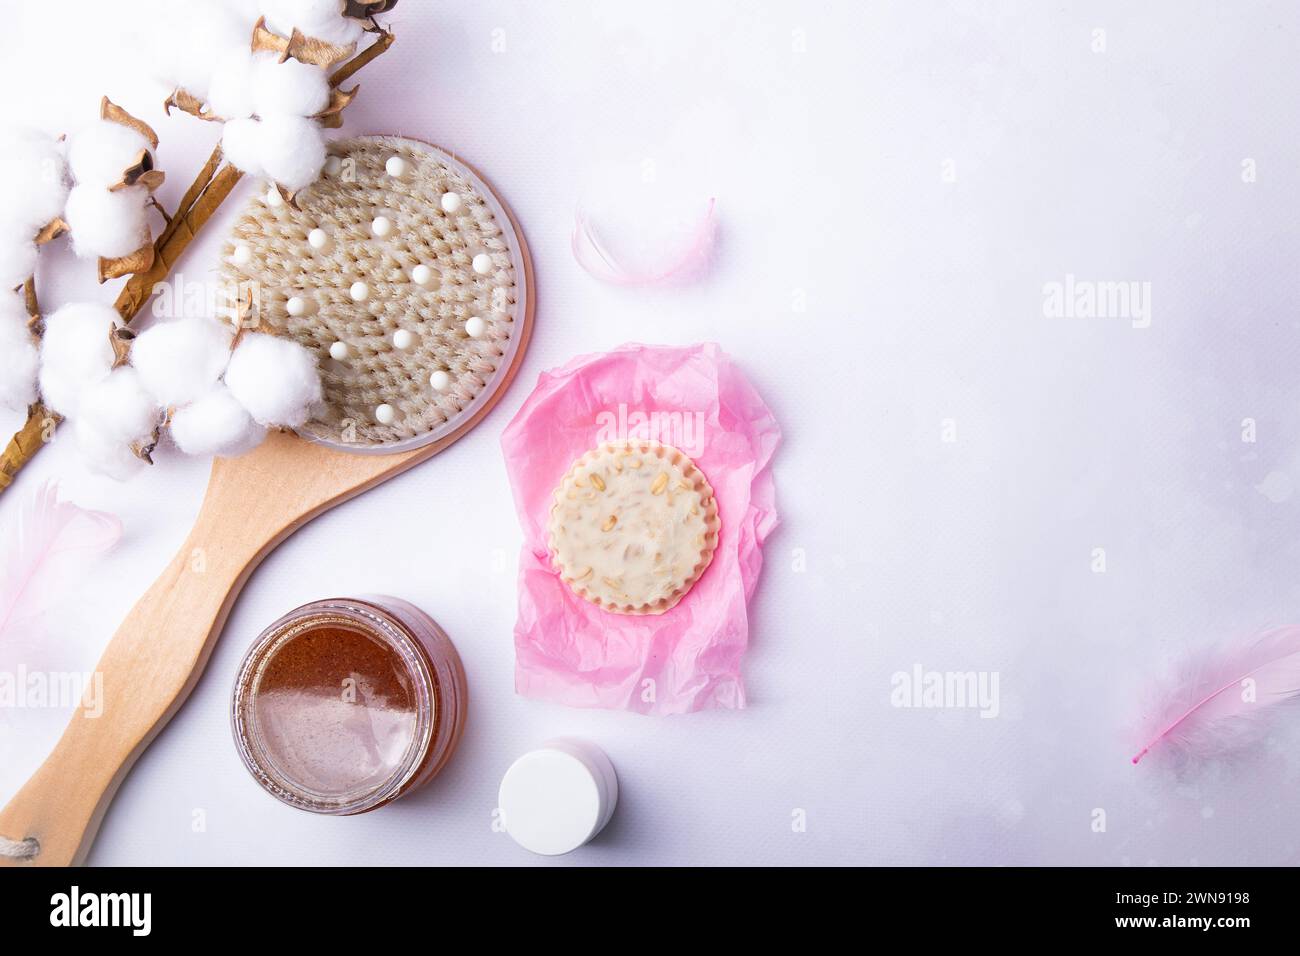 Elegant self-care beauty products for body care, dry brush technique, wooden brush, natural soap, scrub Stock Photo